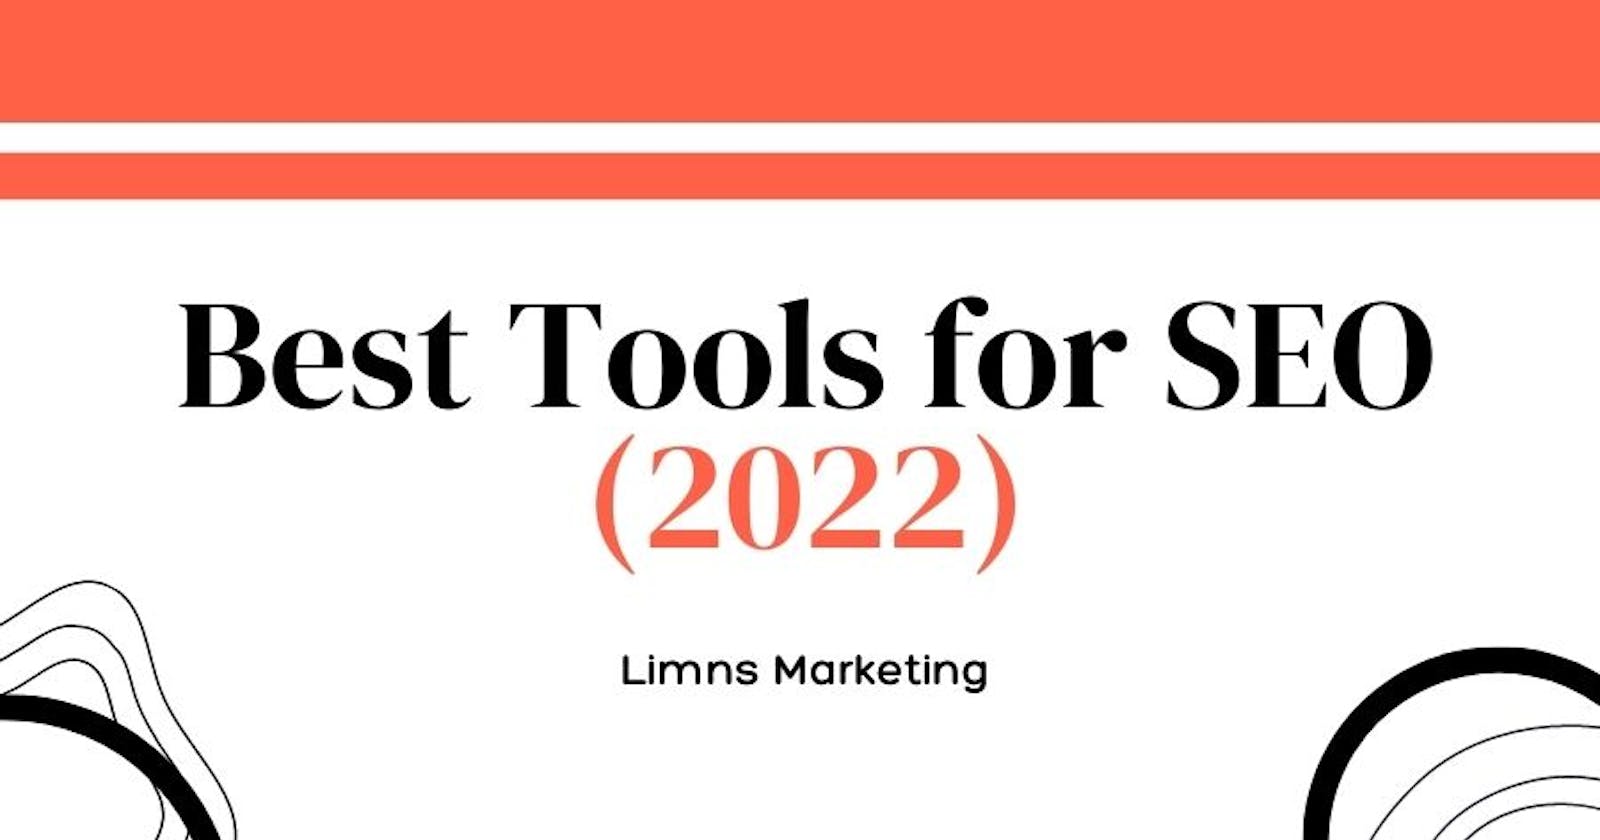 Best Tools for SEO (2022)